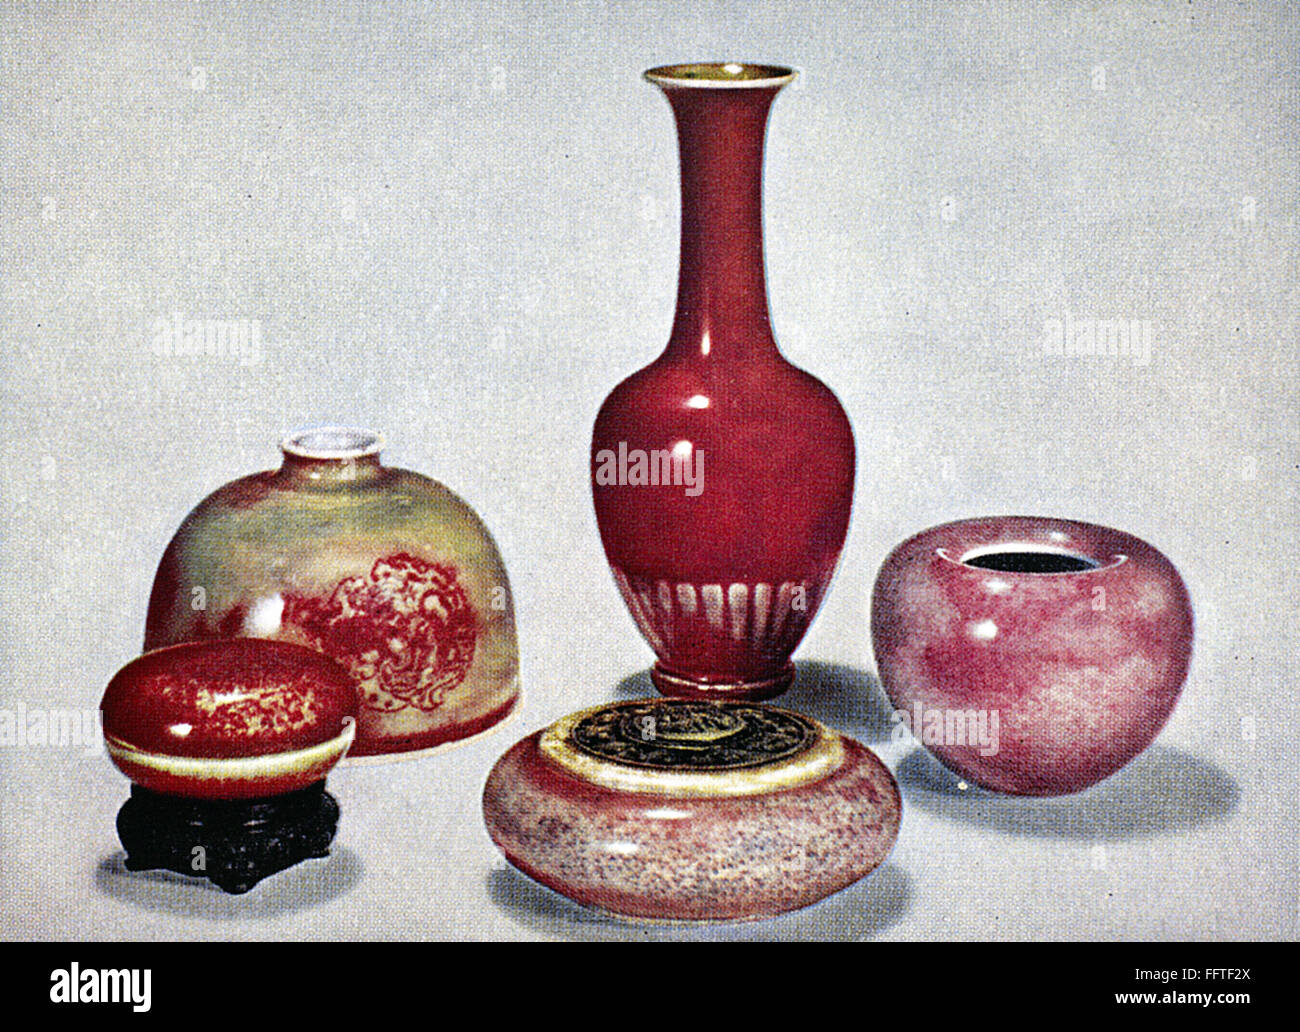 CHINA: GLAZED CERAMICS. /nBottle vase (center) and other porcelain items with pinkish red 'peach bloom' glaze. K'ang Hsi period, Ching Dynasty, 1661-1722. Stock Photo